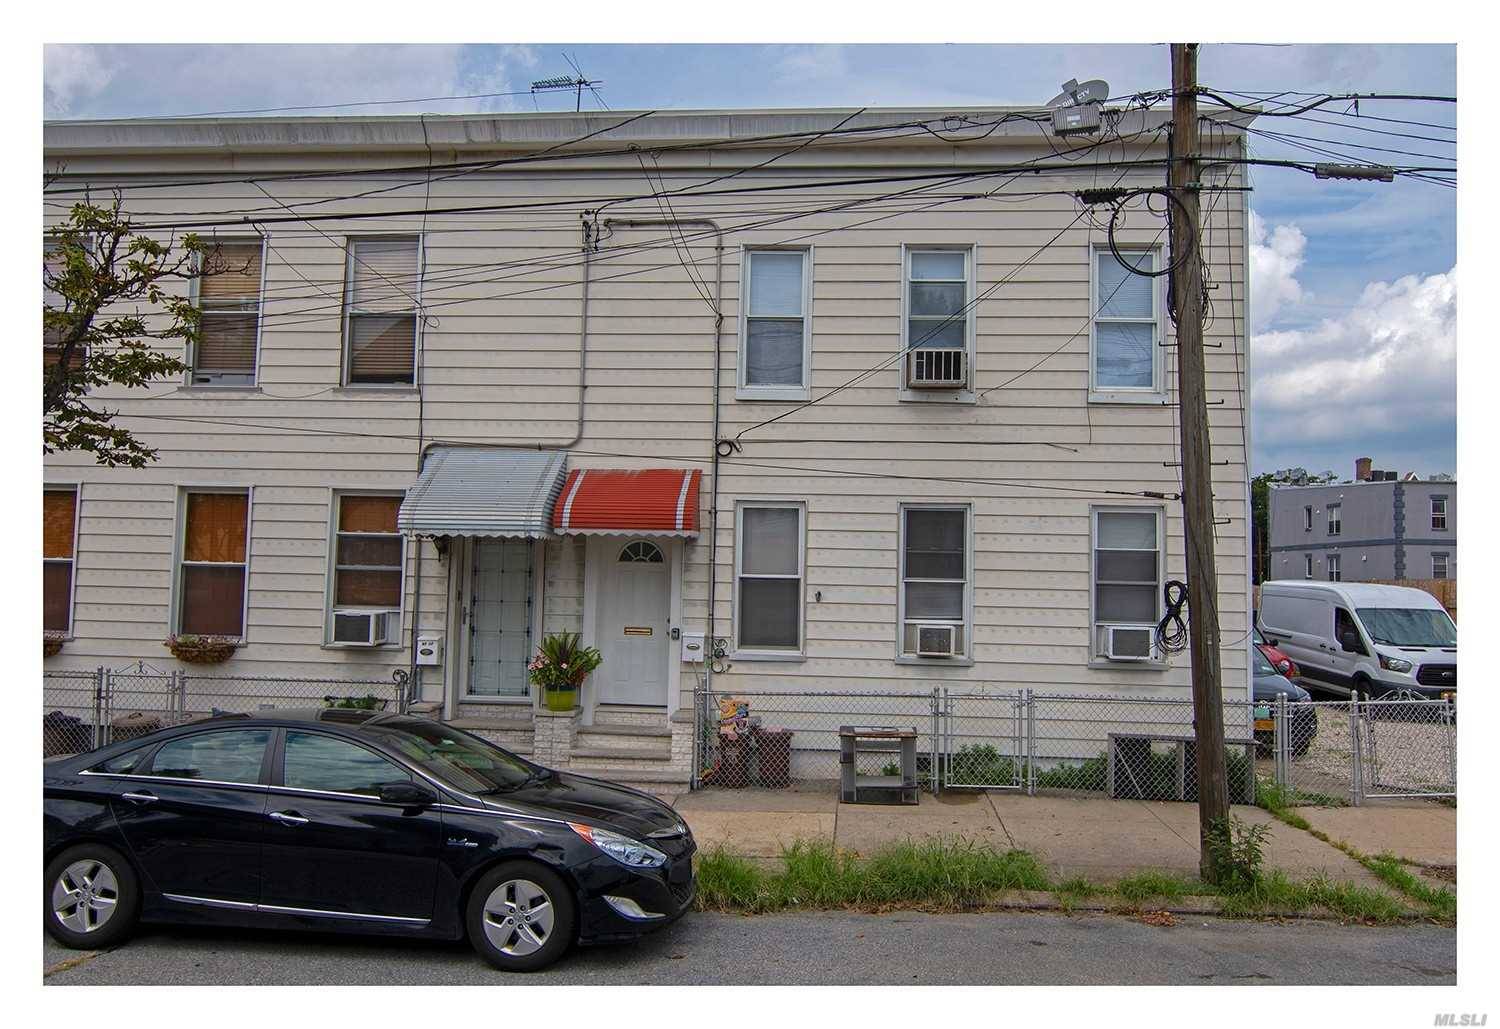 We Are Happy To Present This Lovely 2 Family Home In Maspeth!